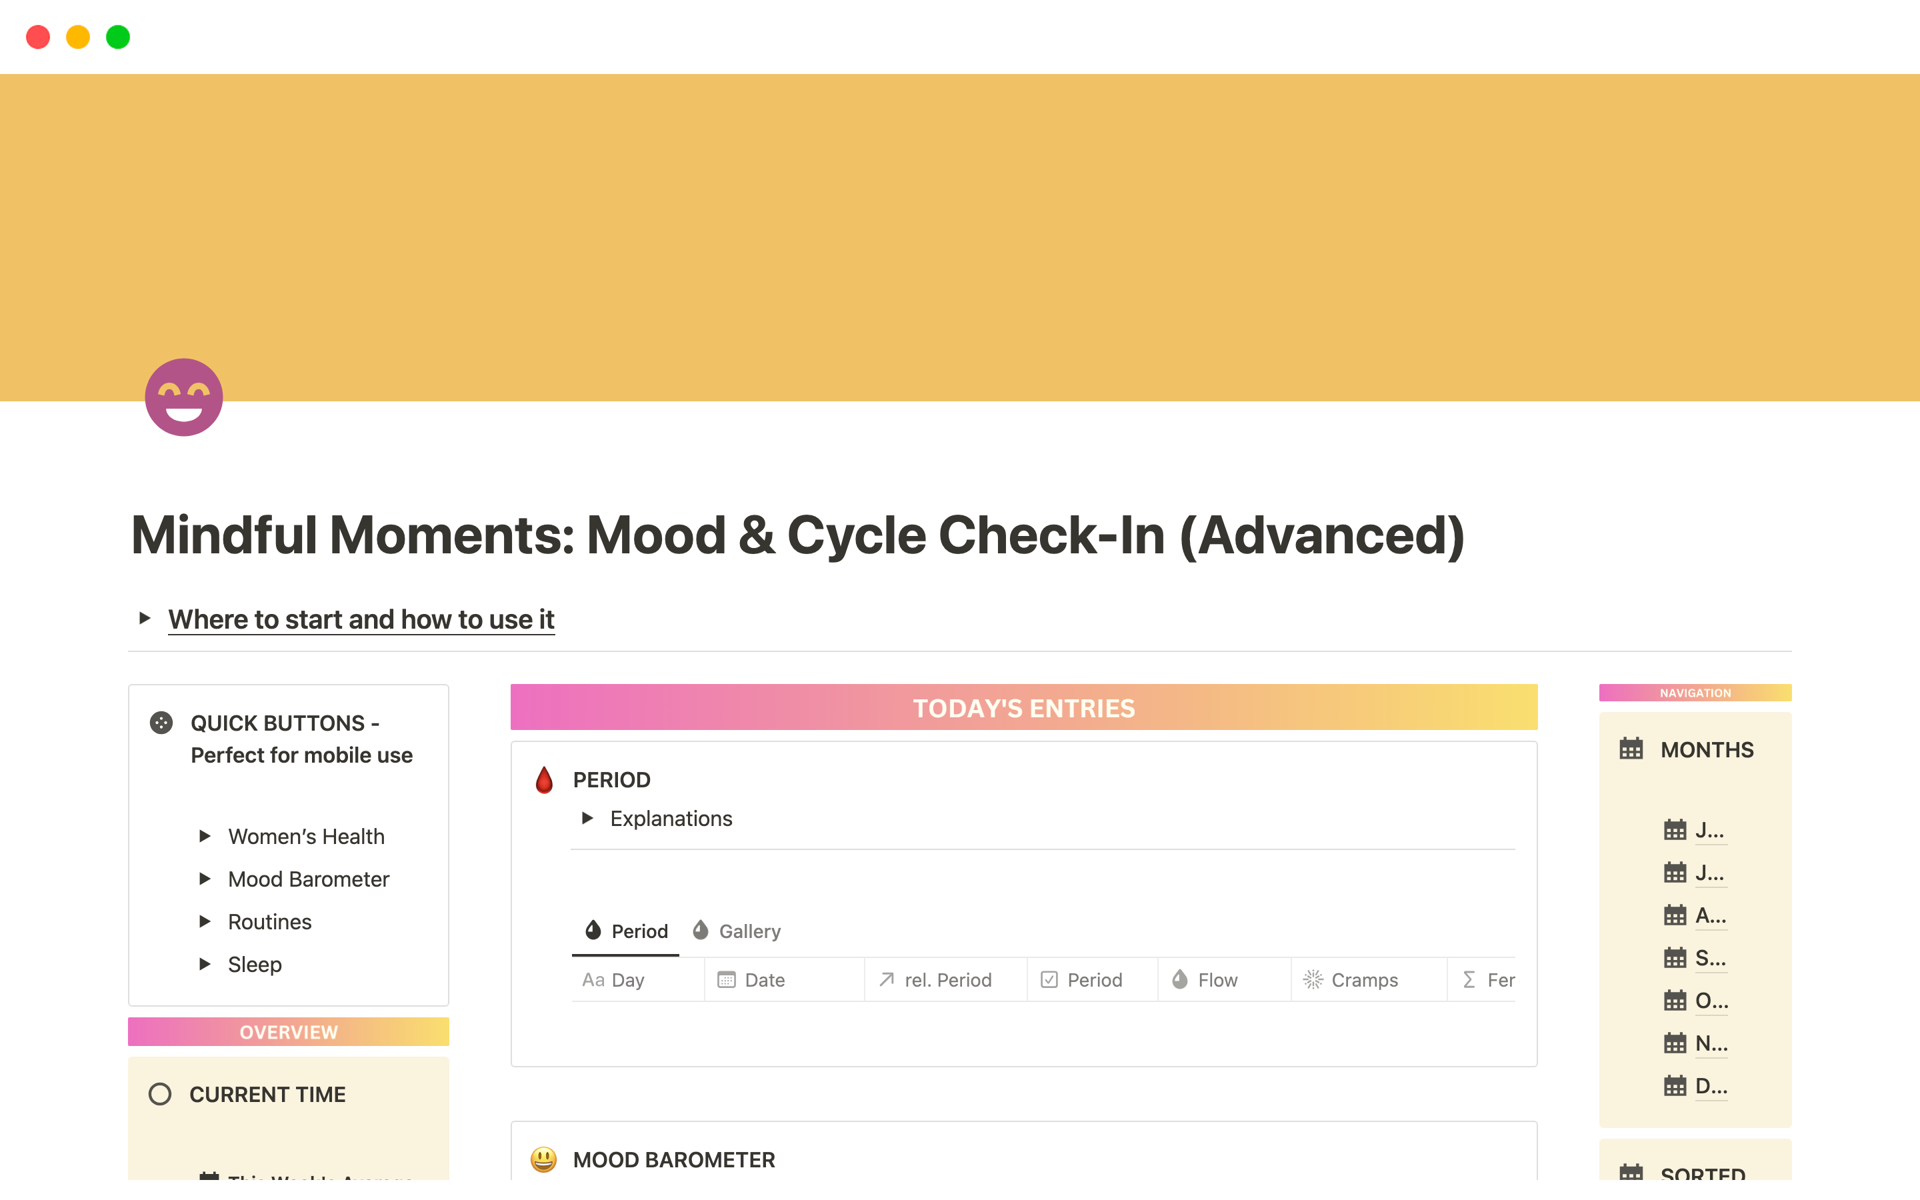 The "Mindful Moments: Mood & Cycle Check-In" Notion template provides a comprehensive tool for tracking and evaluating moods, monitoring menstrual cycles, and promoting self-awareness and well-being.